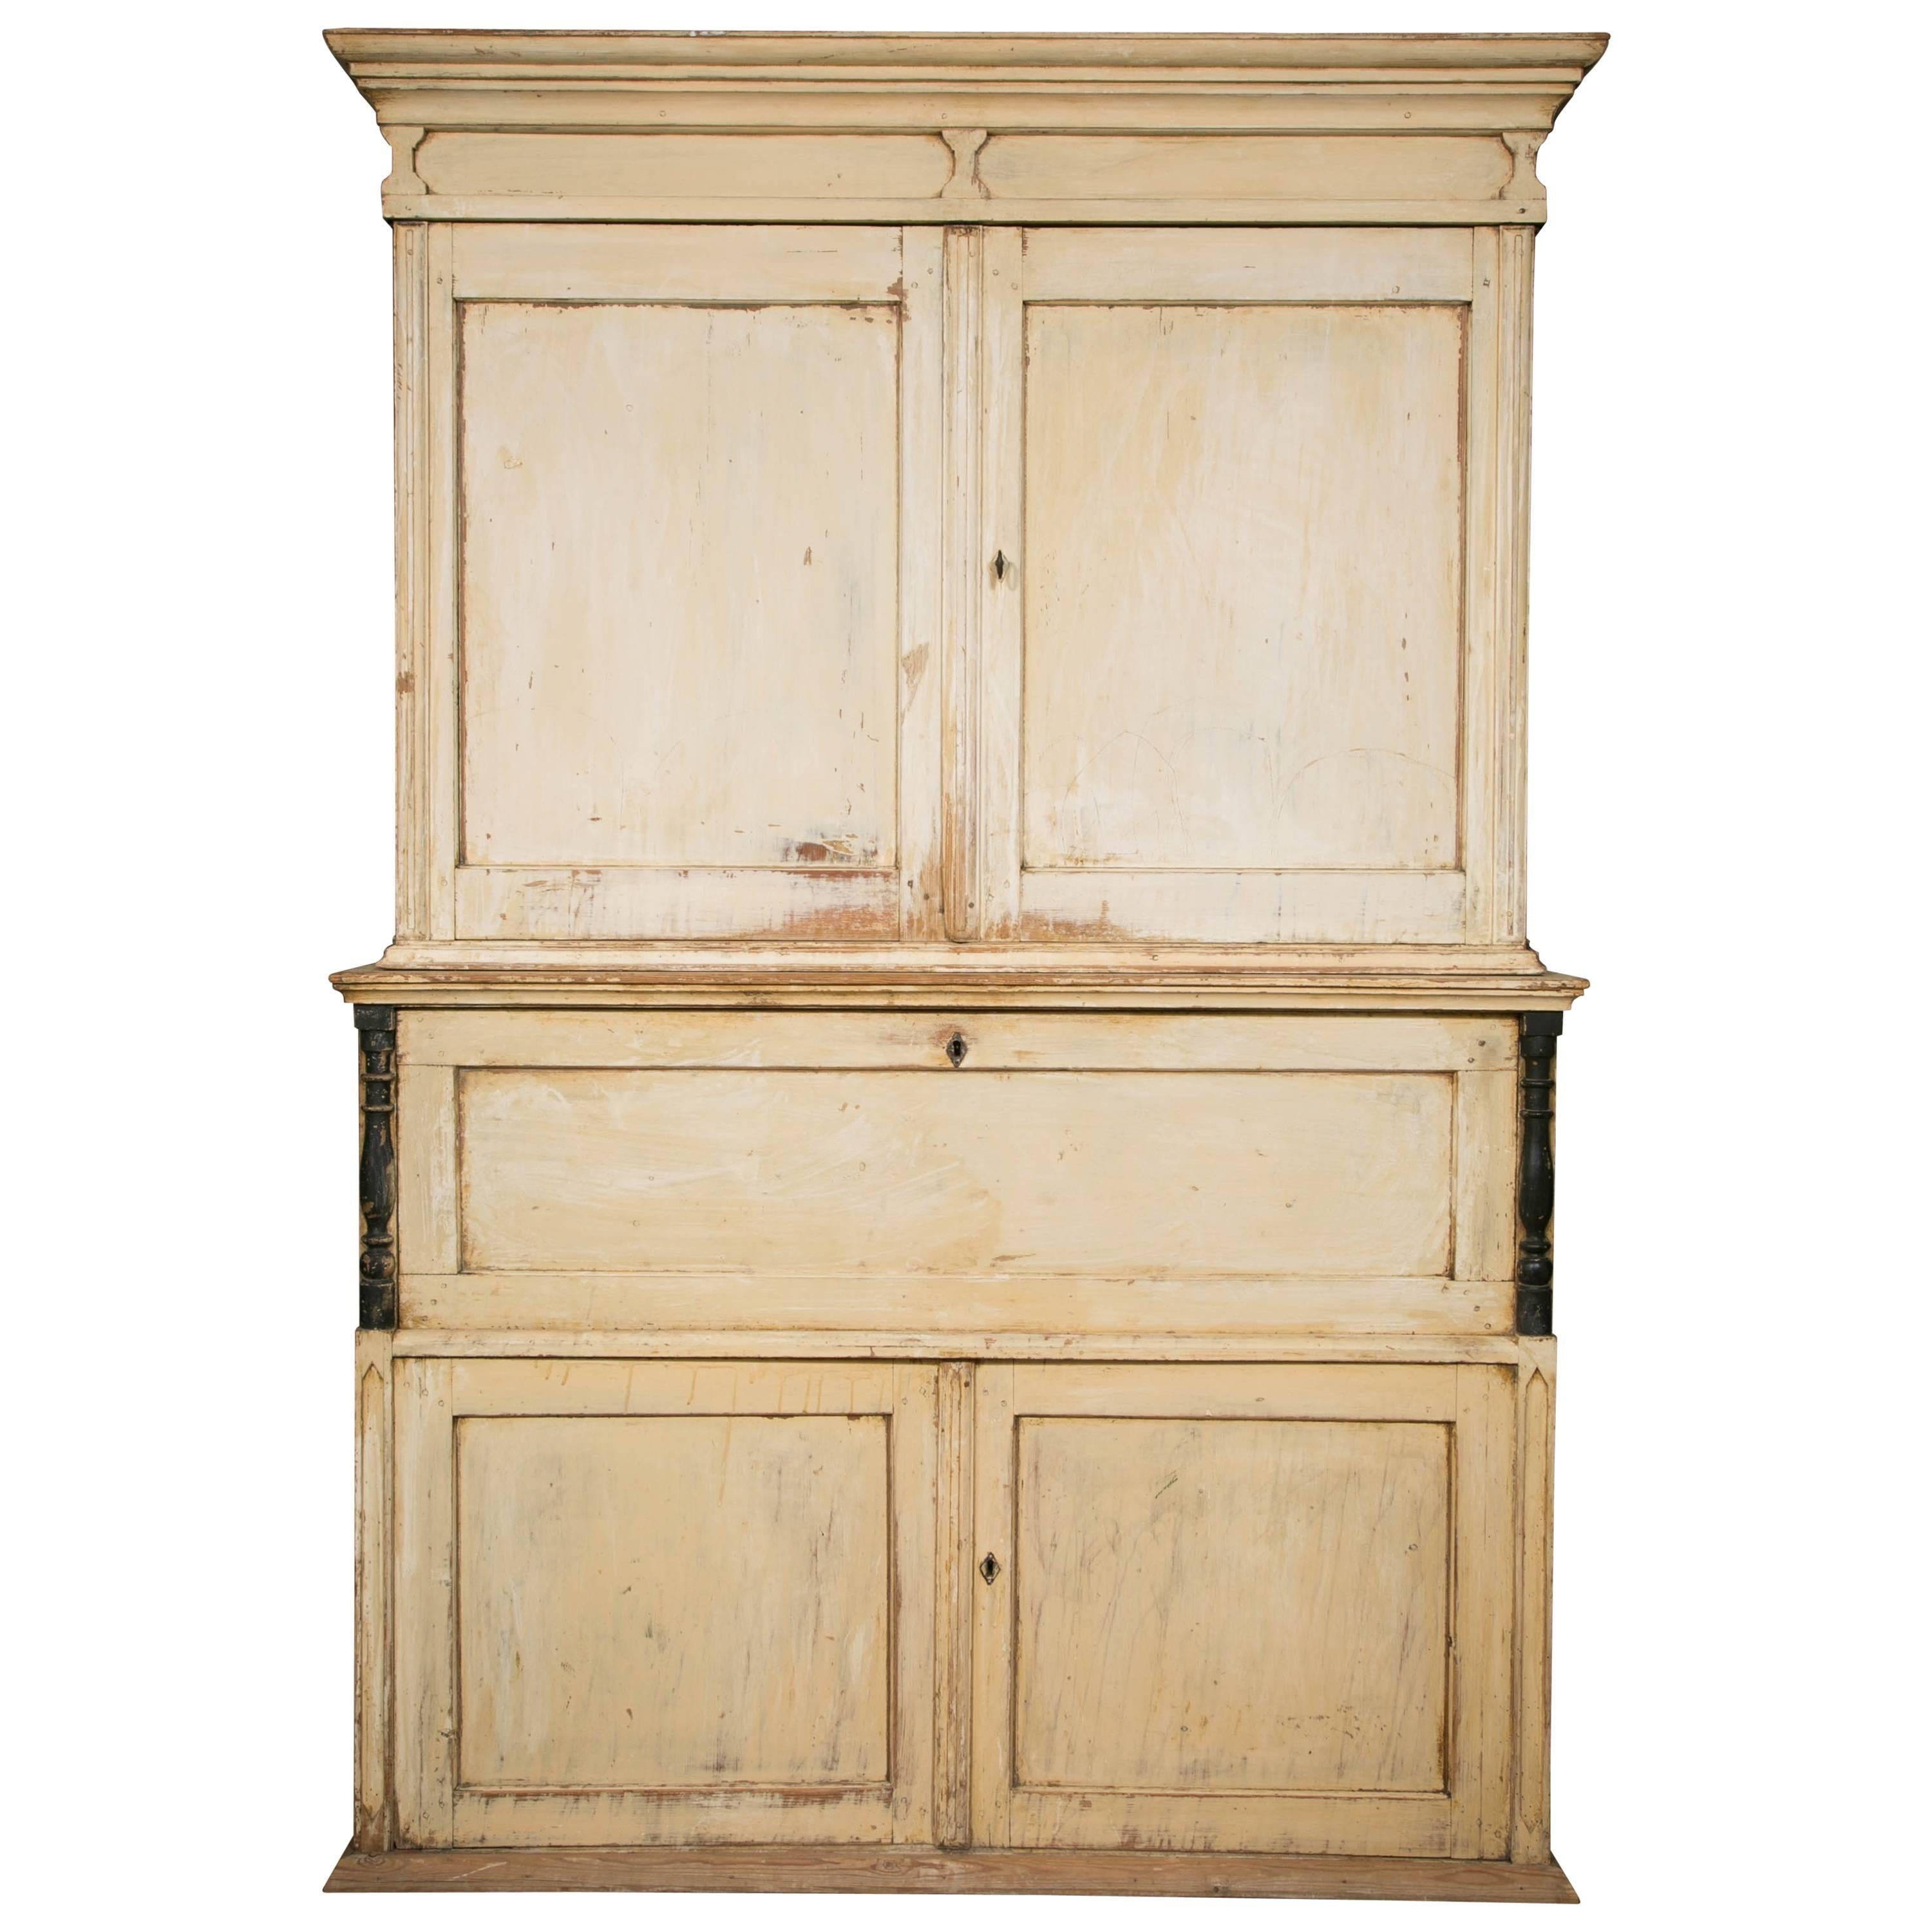 Swedish Painted Cupboard with Drop-Leaf Front, circa 1880